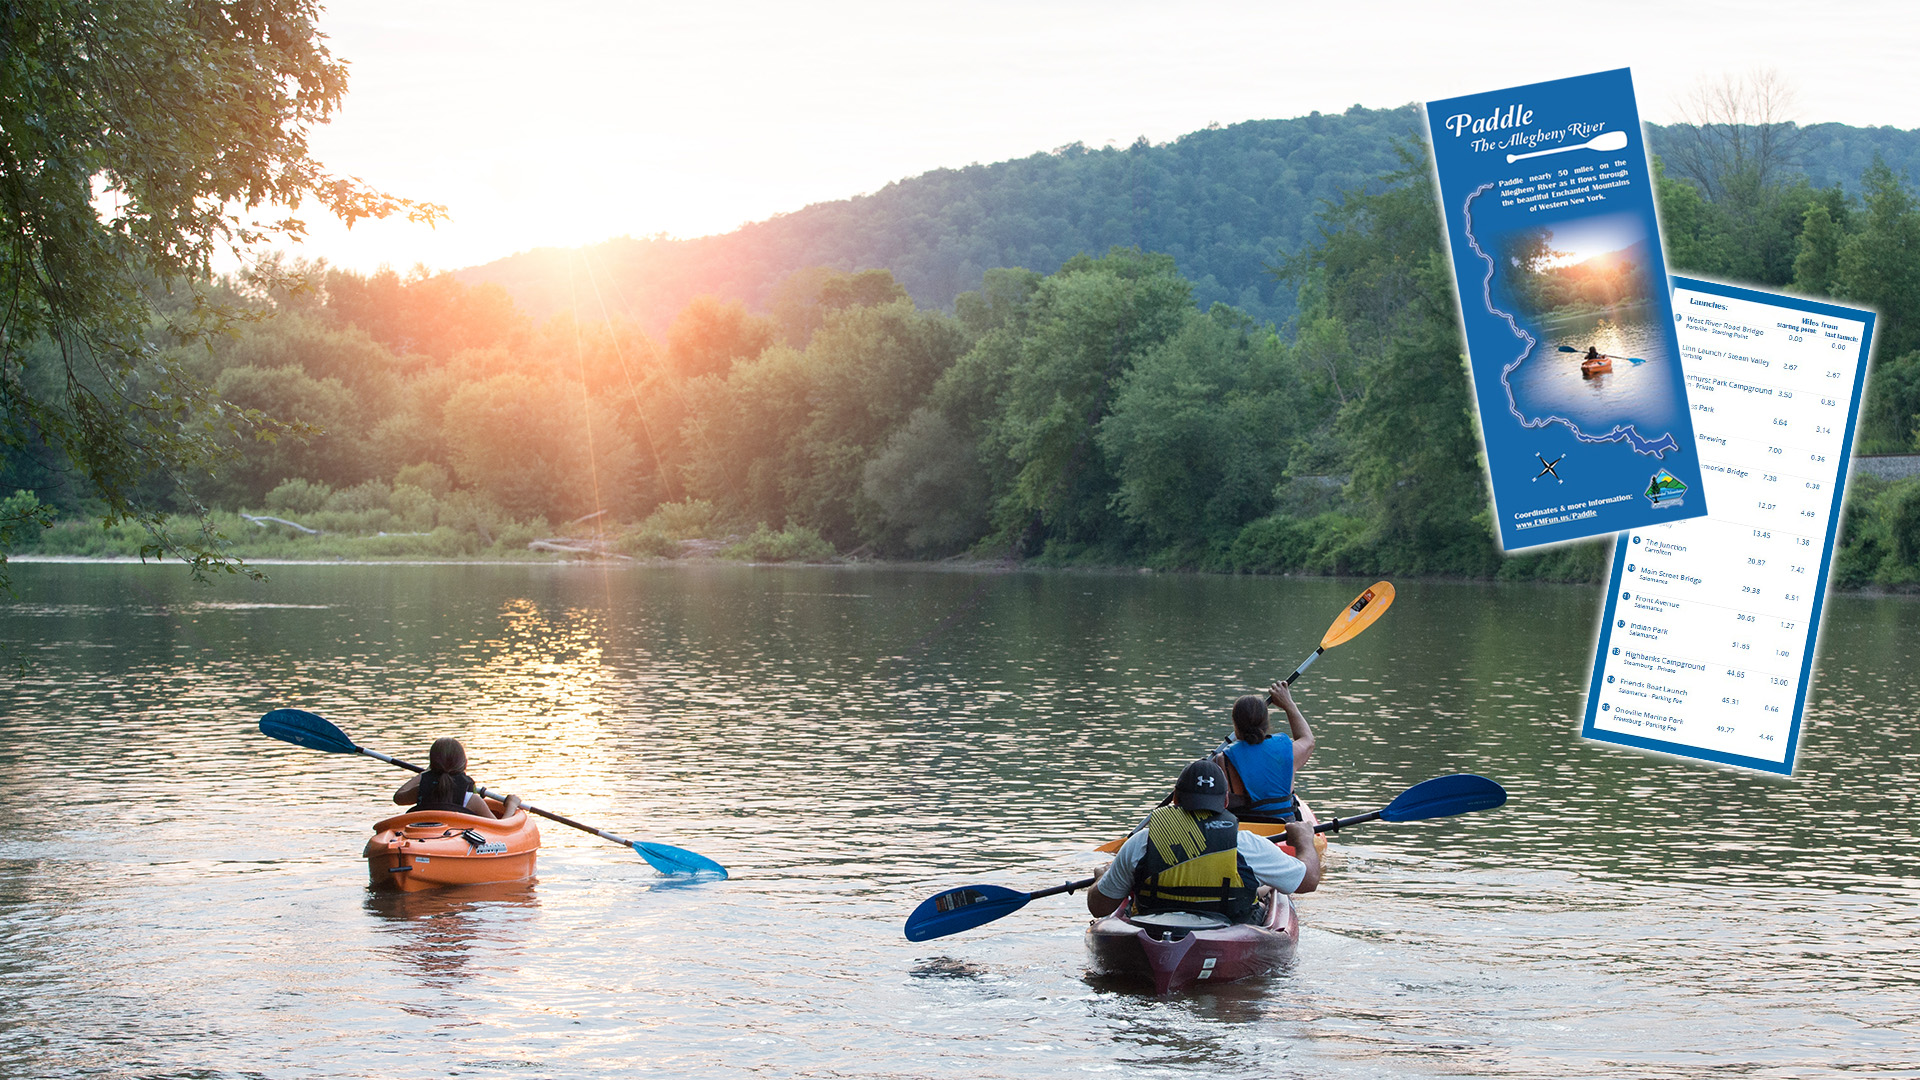 Plan your trip down the Allegheny River in New York State